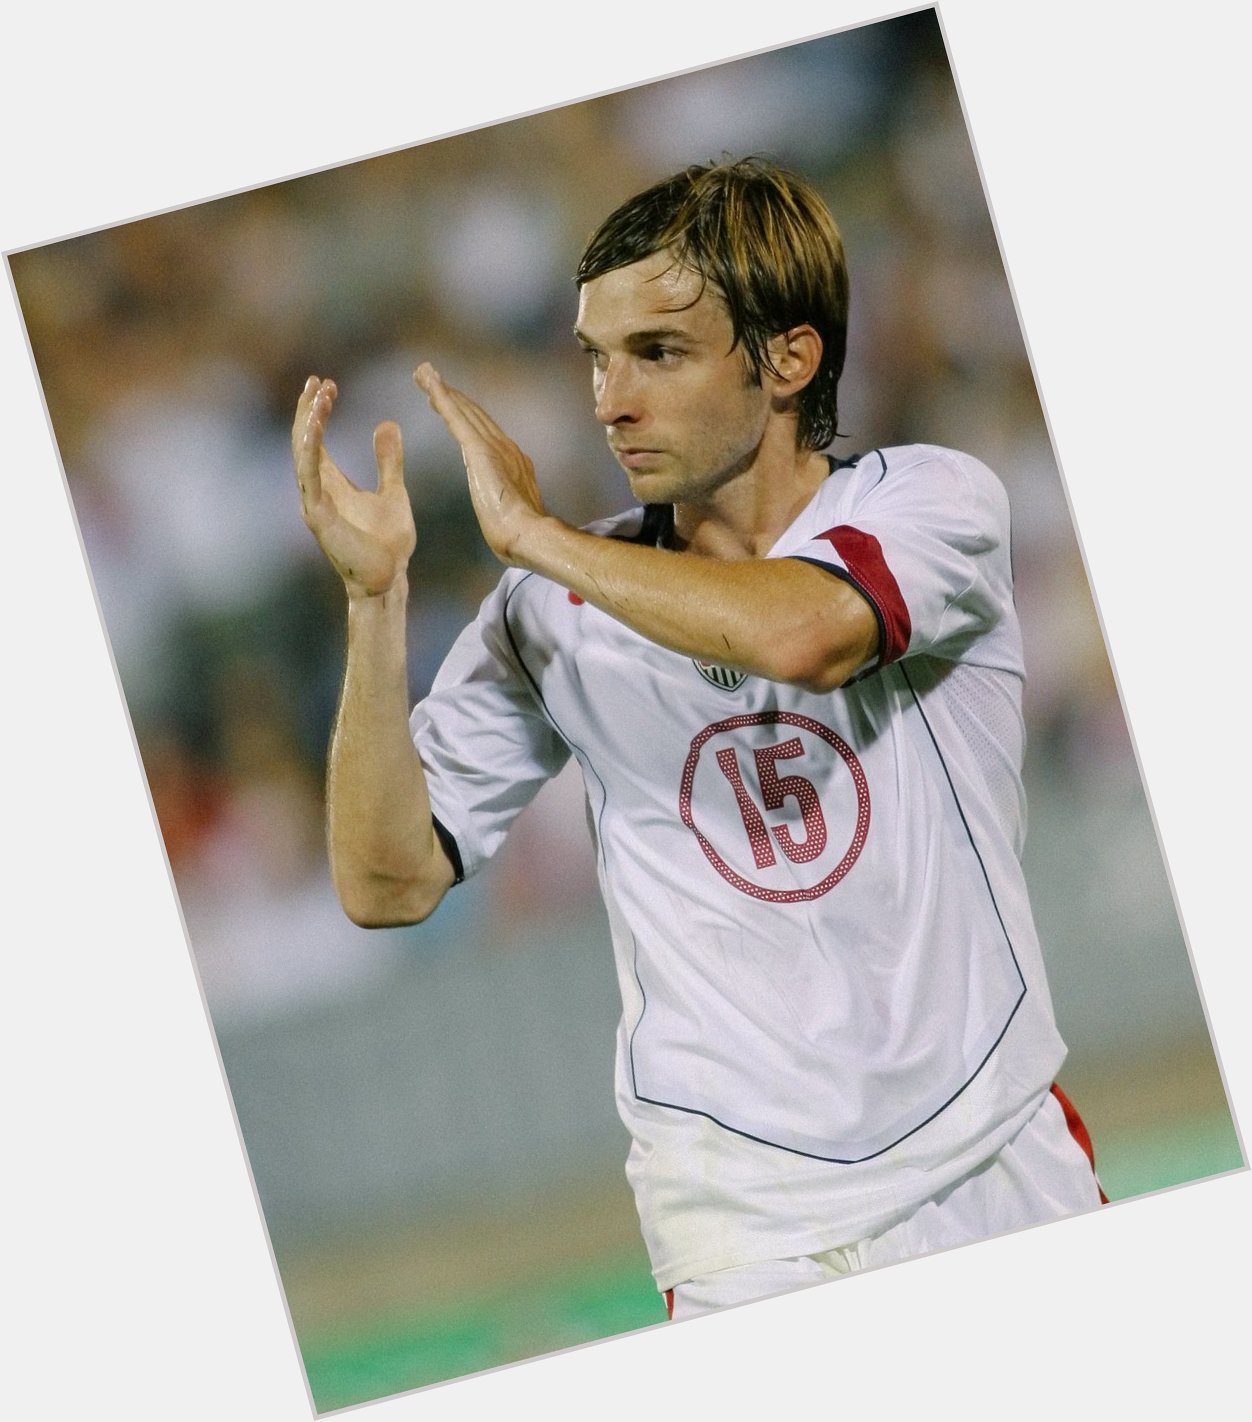 Happy birthday to 2006 World Cup squad member Bobby Convey!  